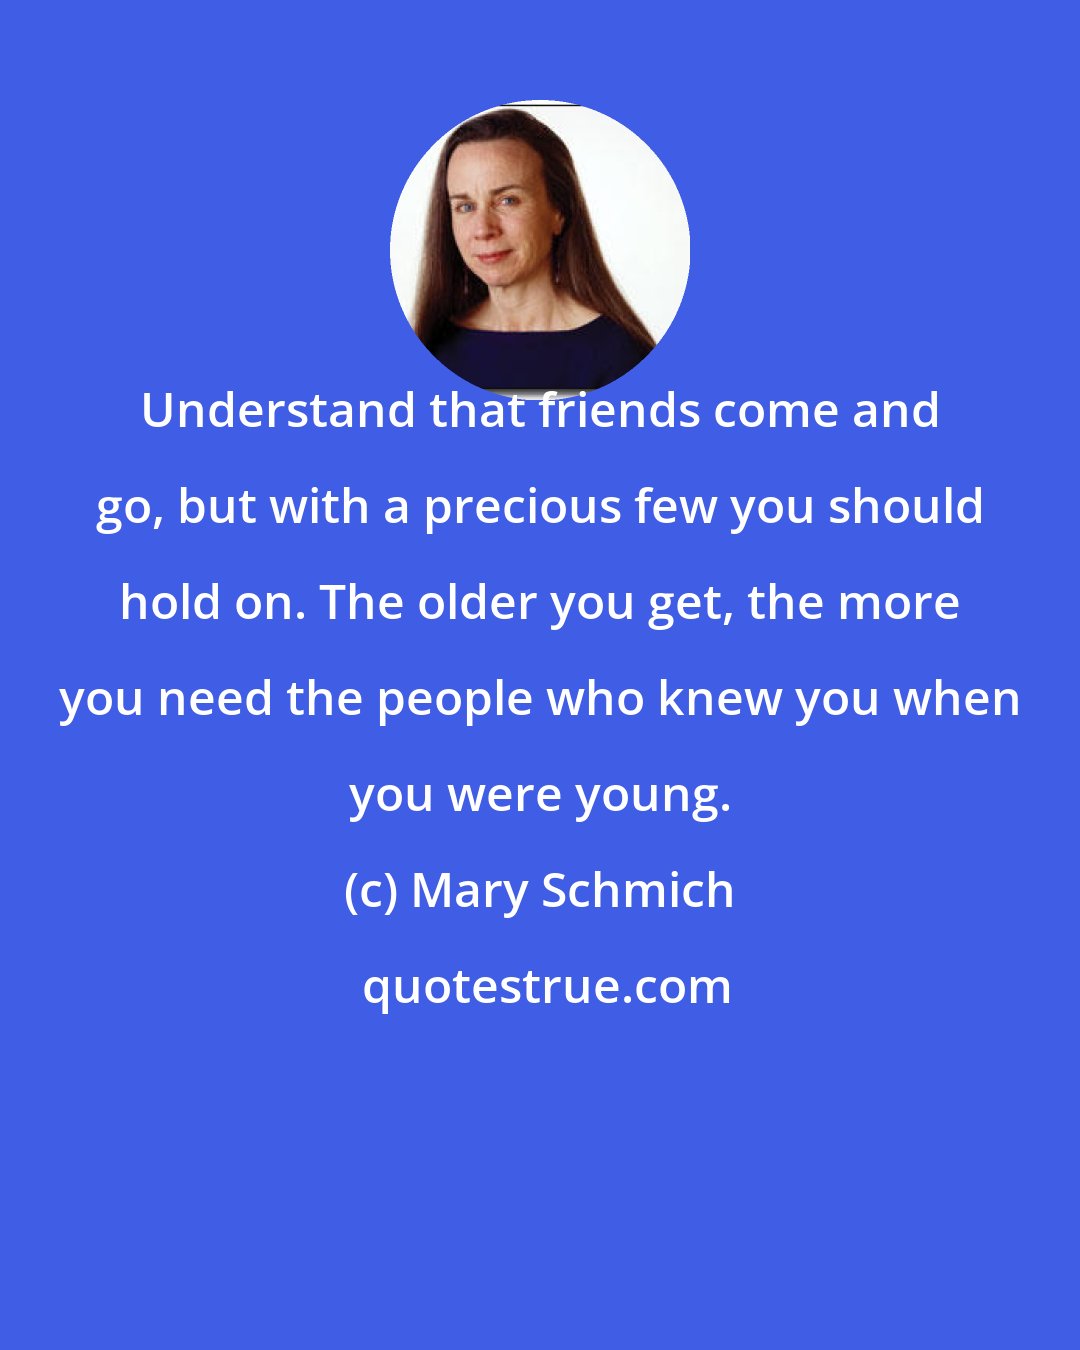 Mary Schmich: Understand that friends come and go, but with a precious few you should hold on. The older you get, the more you need the people who knew you when you were young.